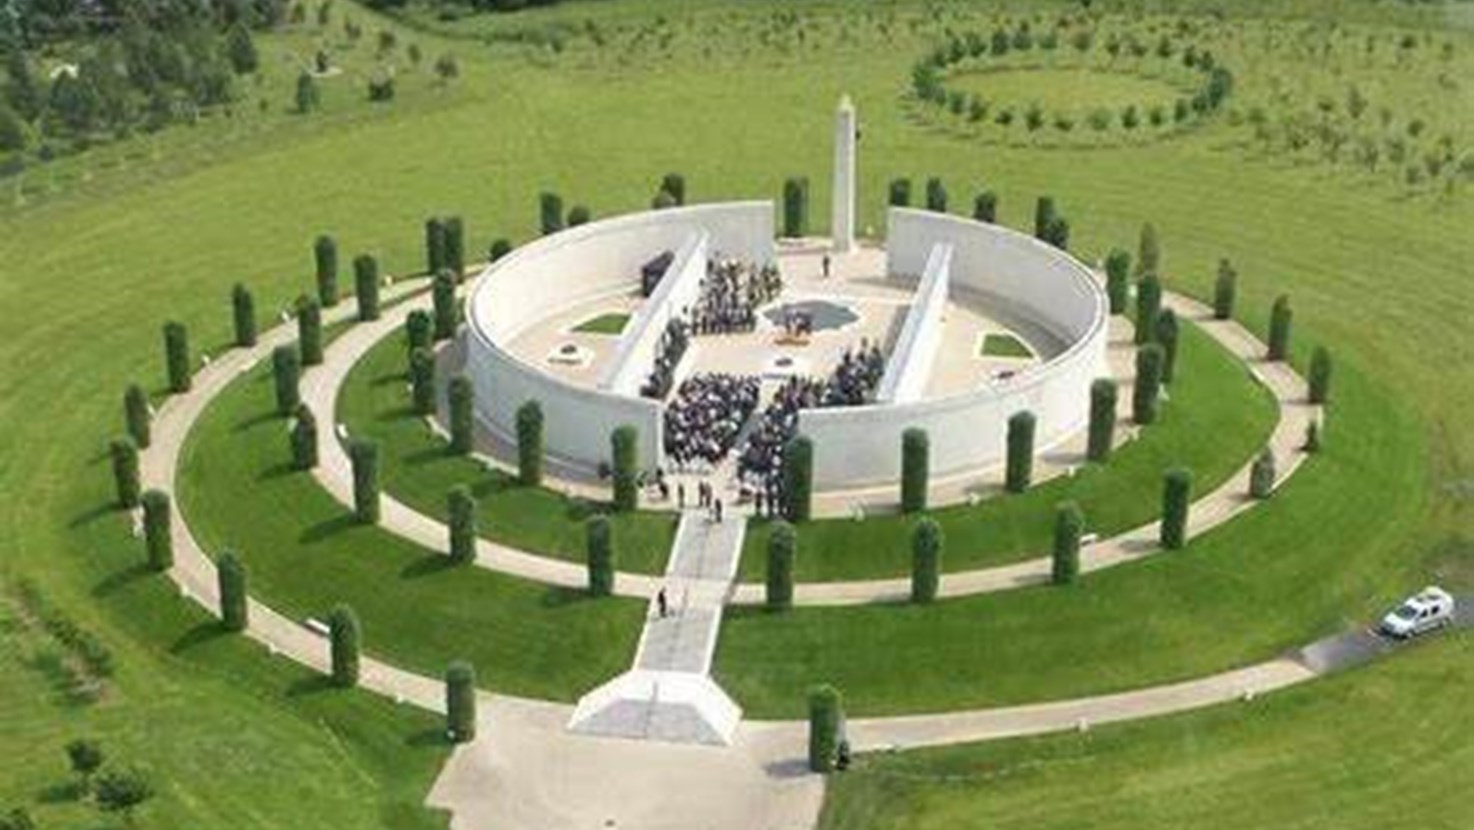 View all of the events and meetings that PCC Marc Jones attended or hosted at the National Memorial Arboretum in 2022